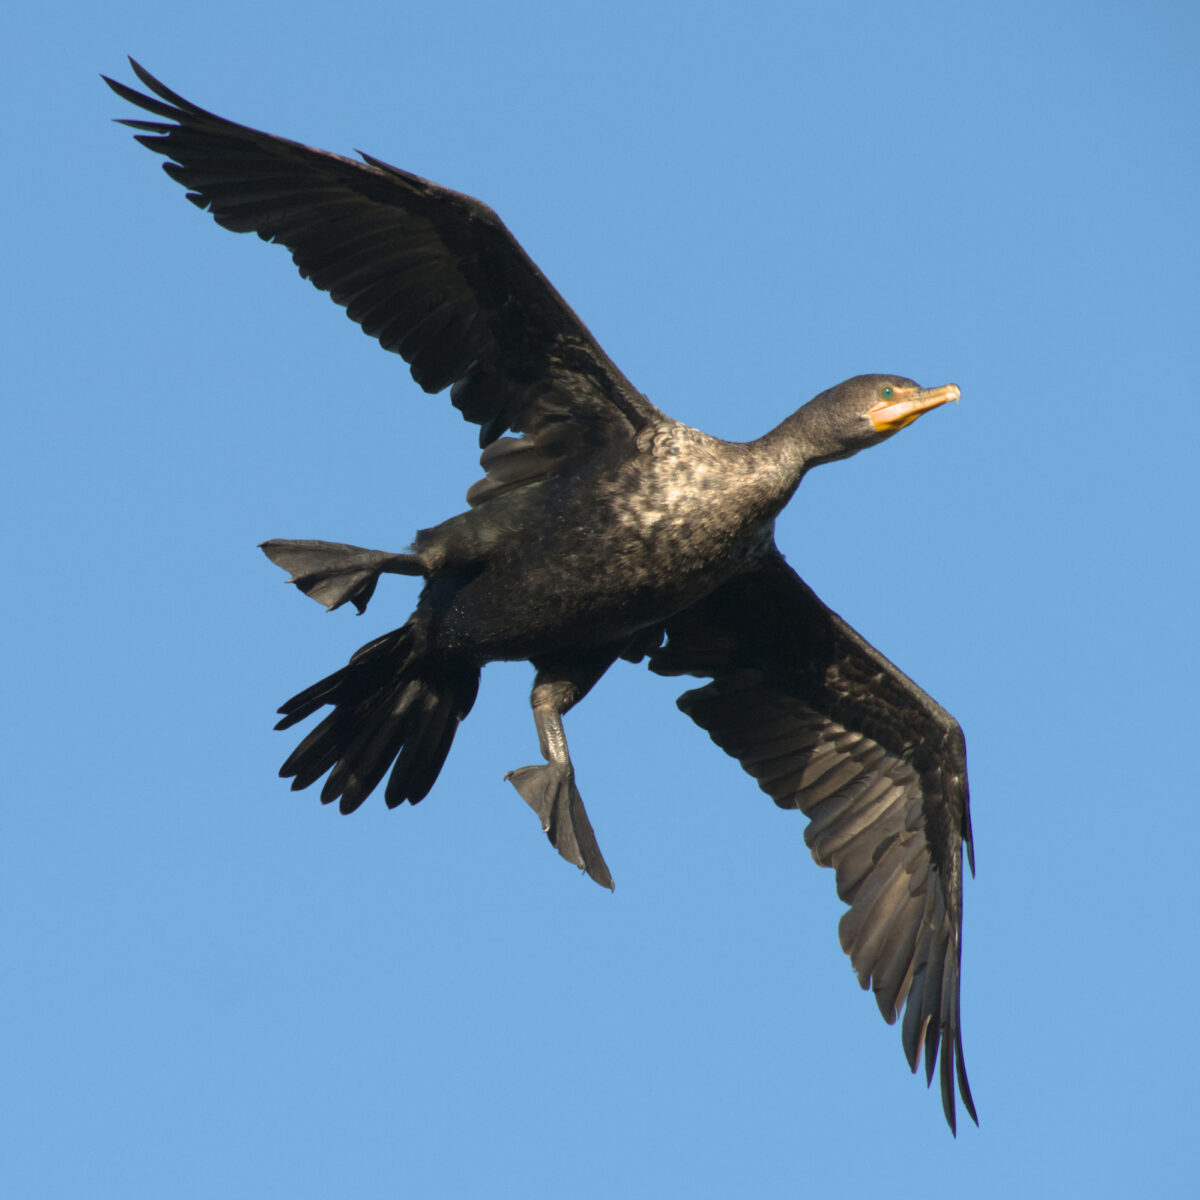 A double-crested cormorant flies overhead, webbed feet extended for landing